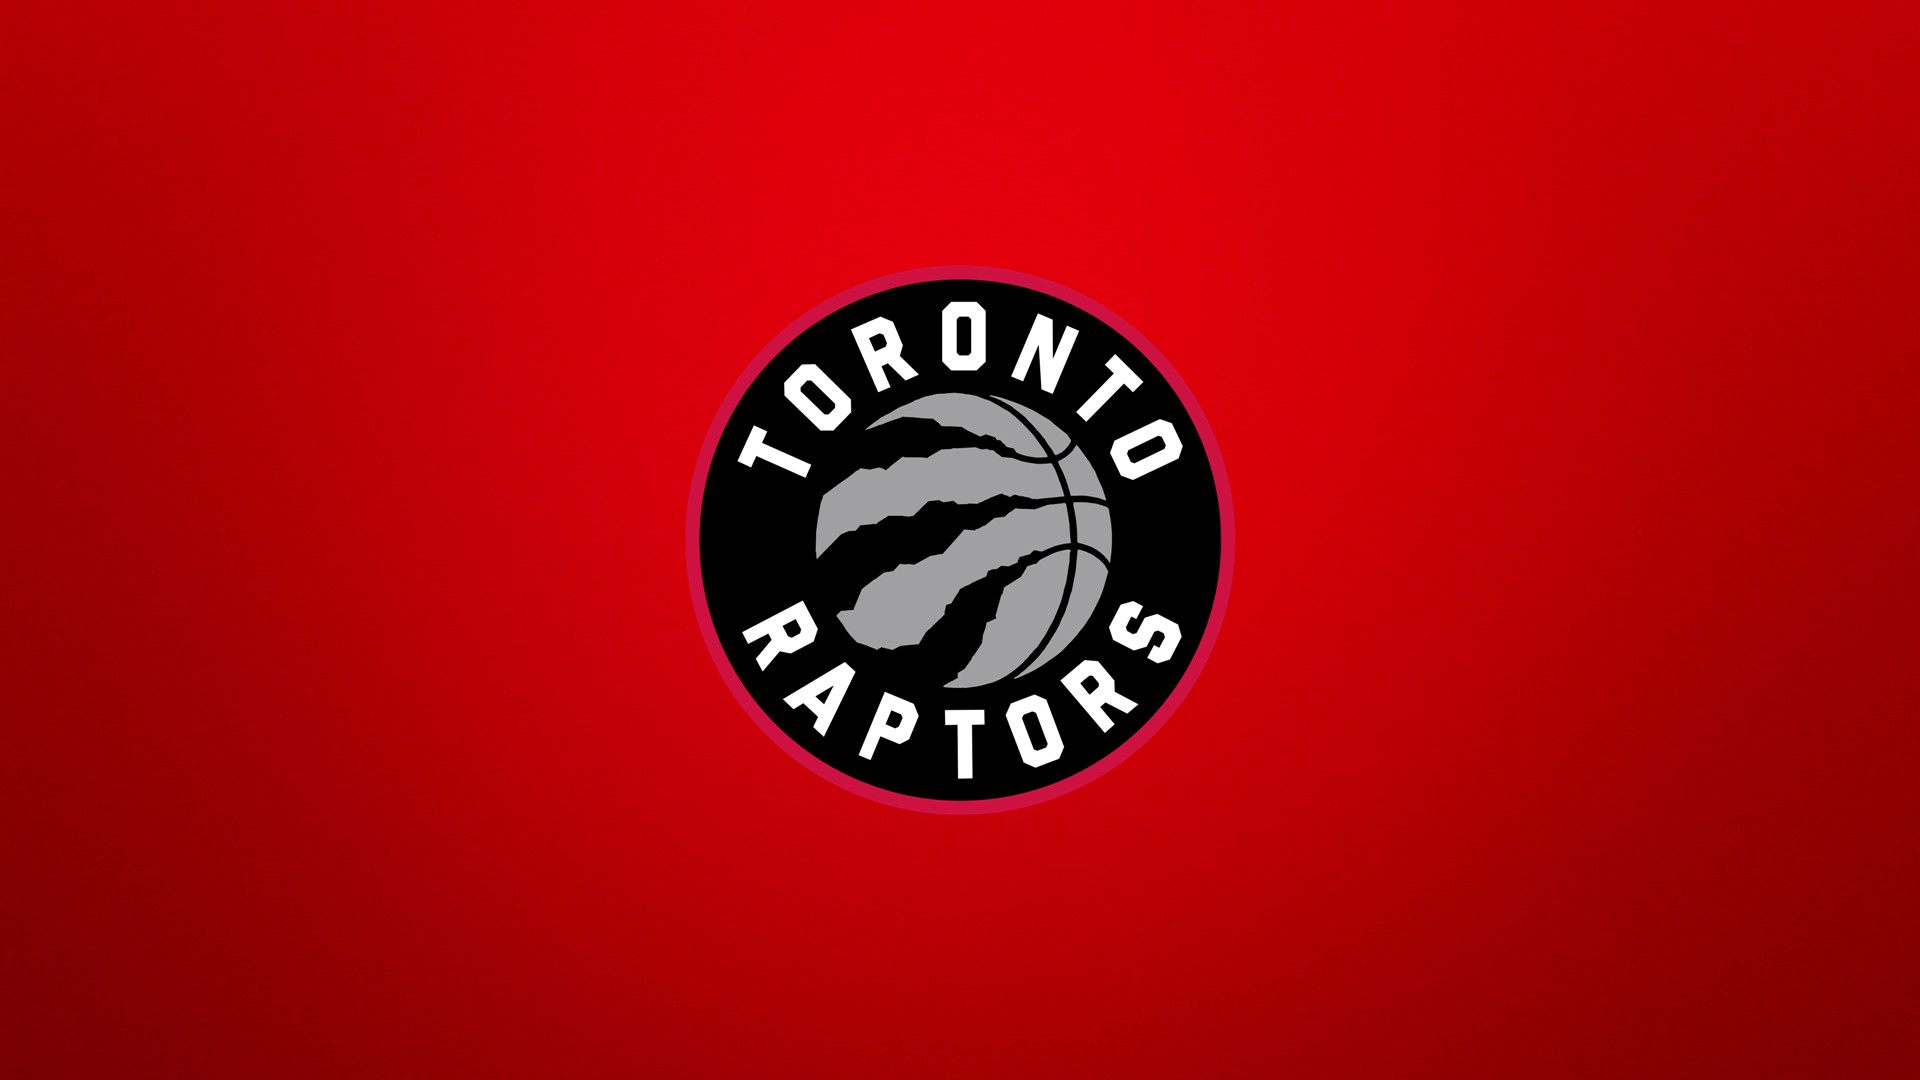 Basketball Toronto Mac Backgrounds with image dimensions 1920x1080 pixel. You can make this wallpaper for your Desktop Computer Backgrounds, Windows or Mac Screensavers, iPhone Lock screen, Tablet or Android and another Mobile Phone device